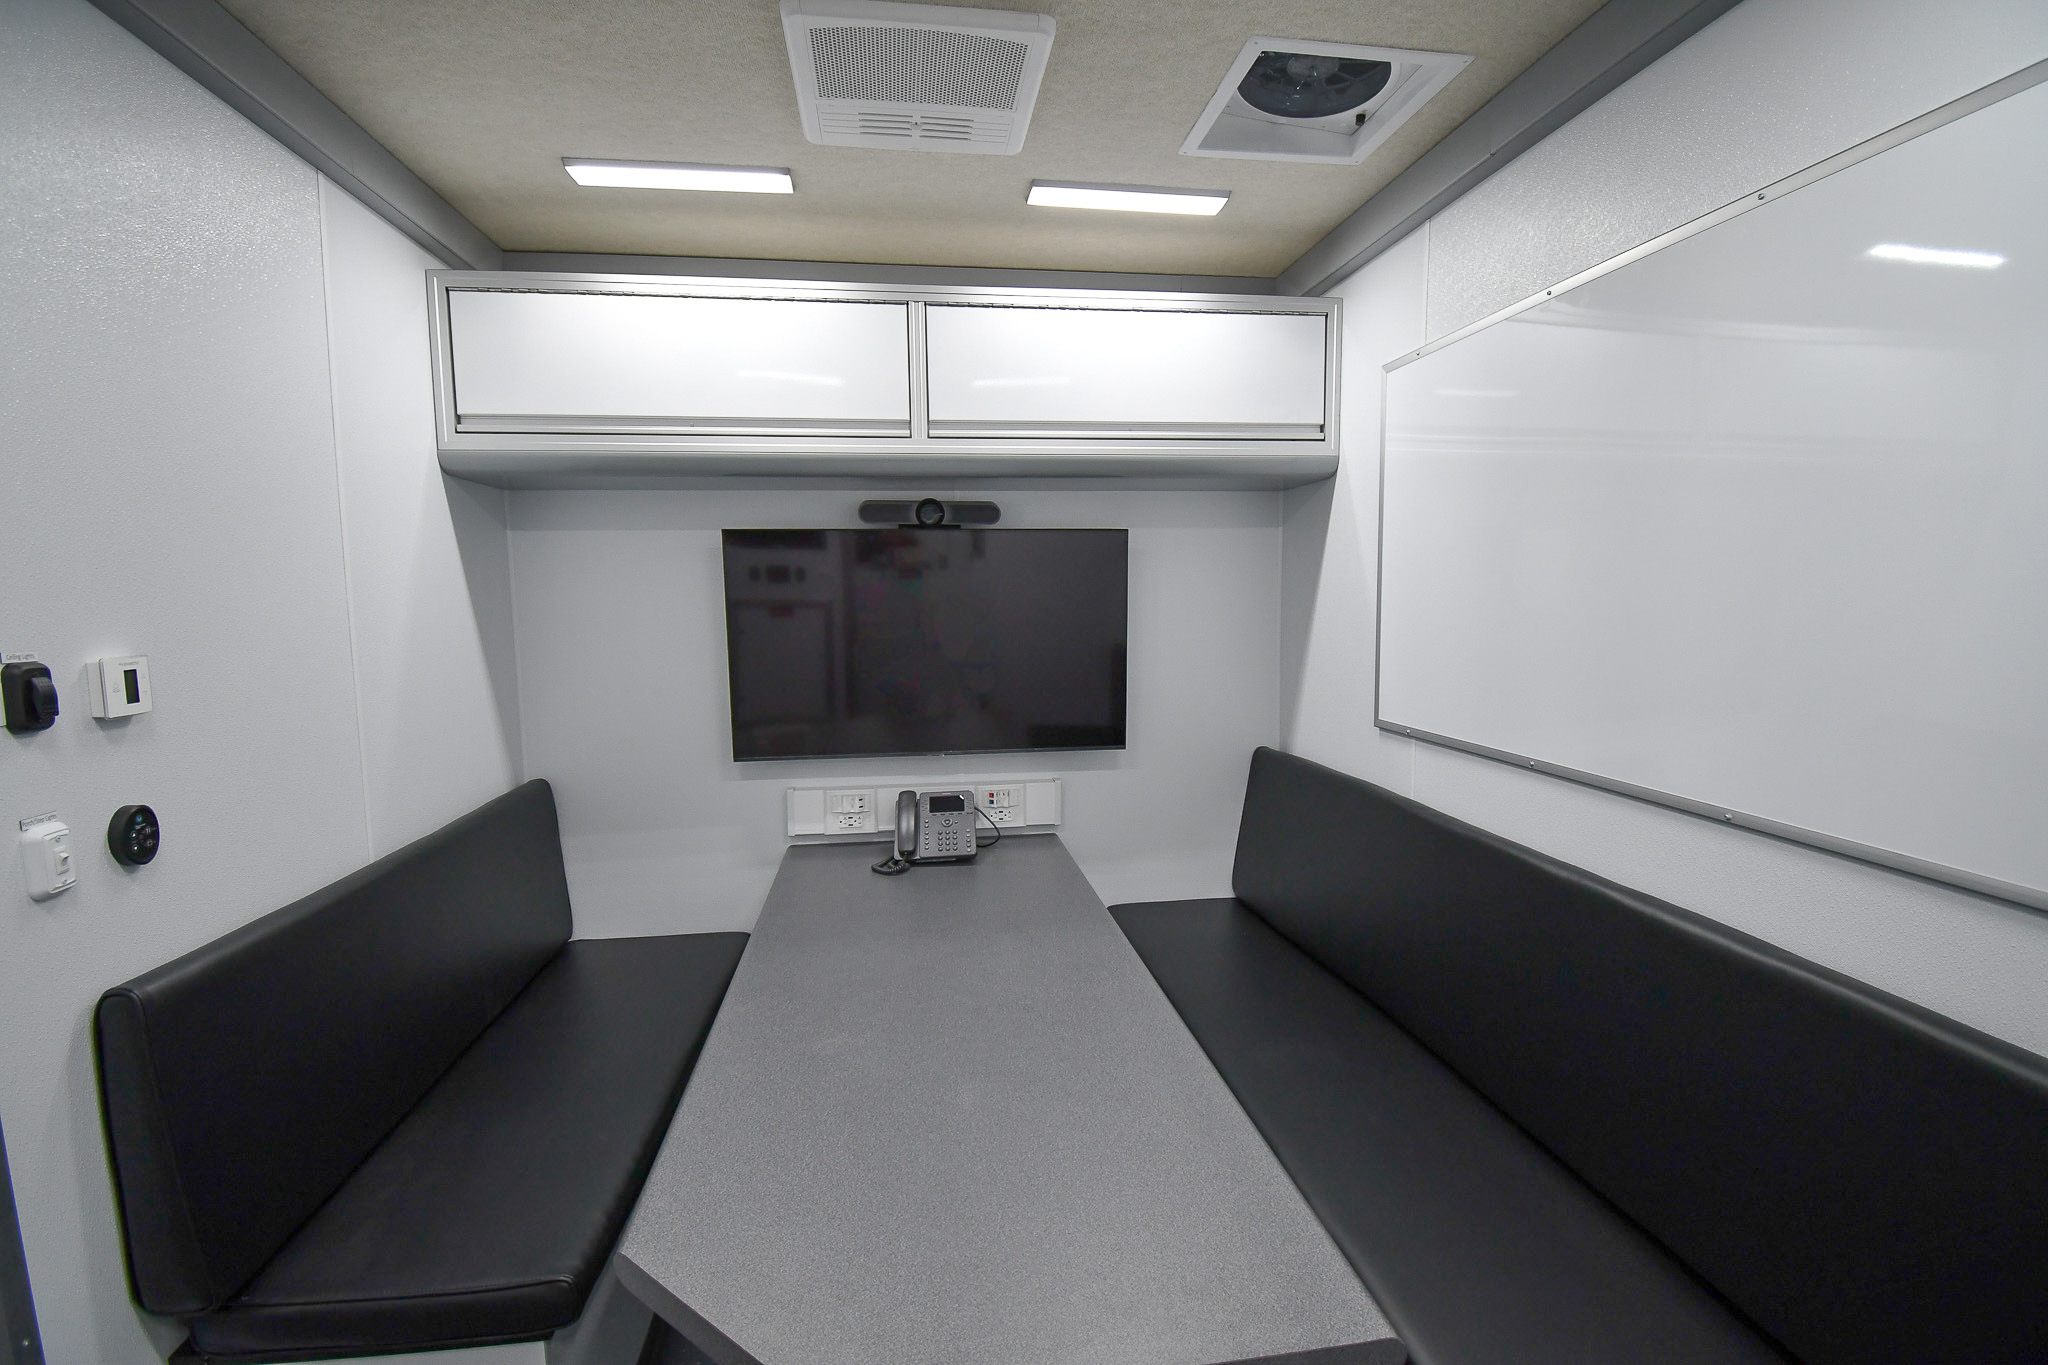 The conference room inside the unit for New Orleans, LA.